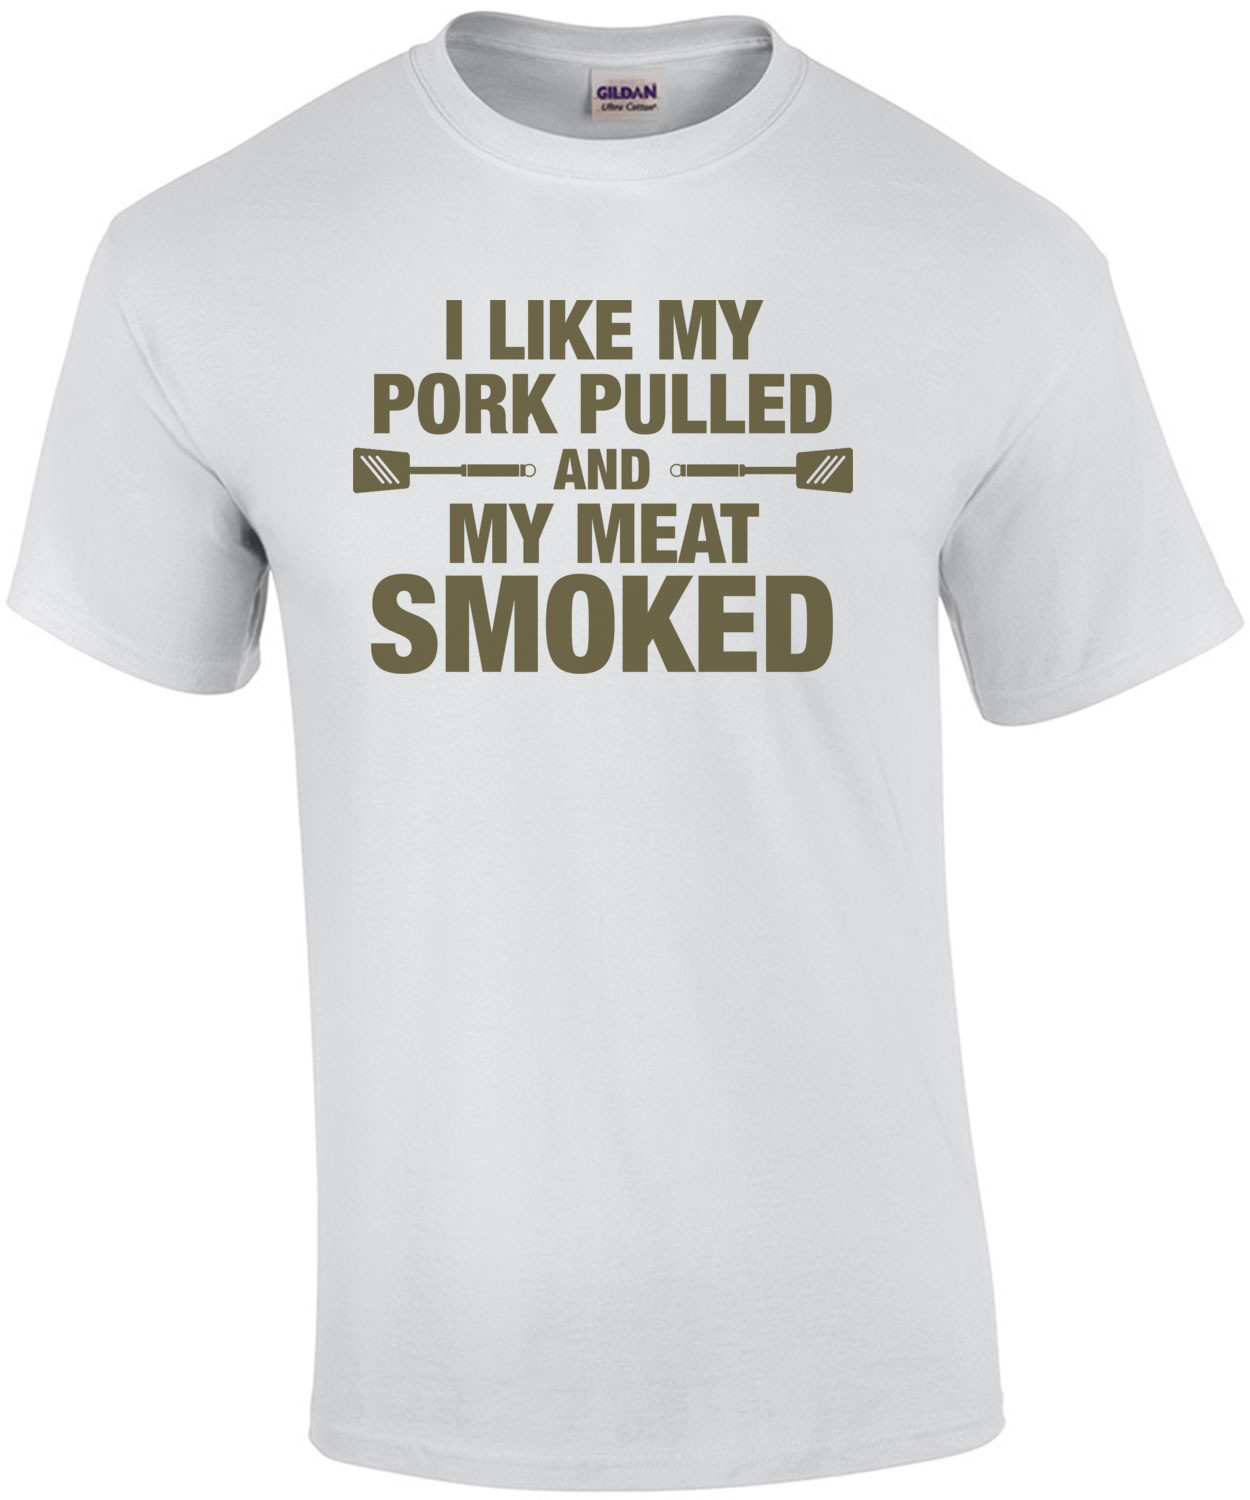 I Like My Pork Pulled & My Meat Smoked T-Shirt